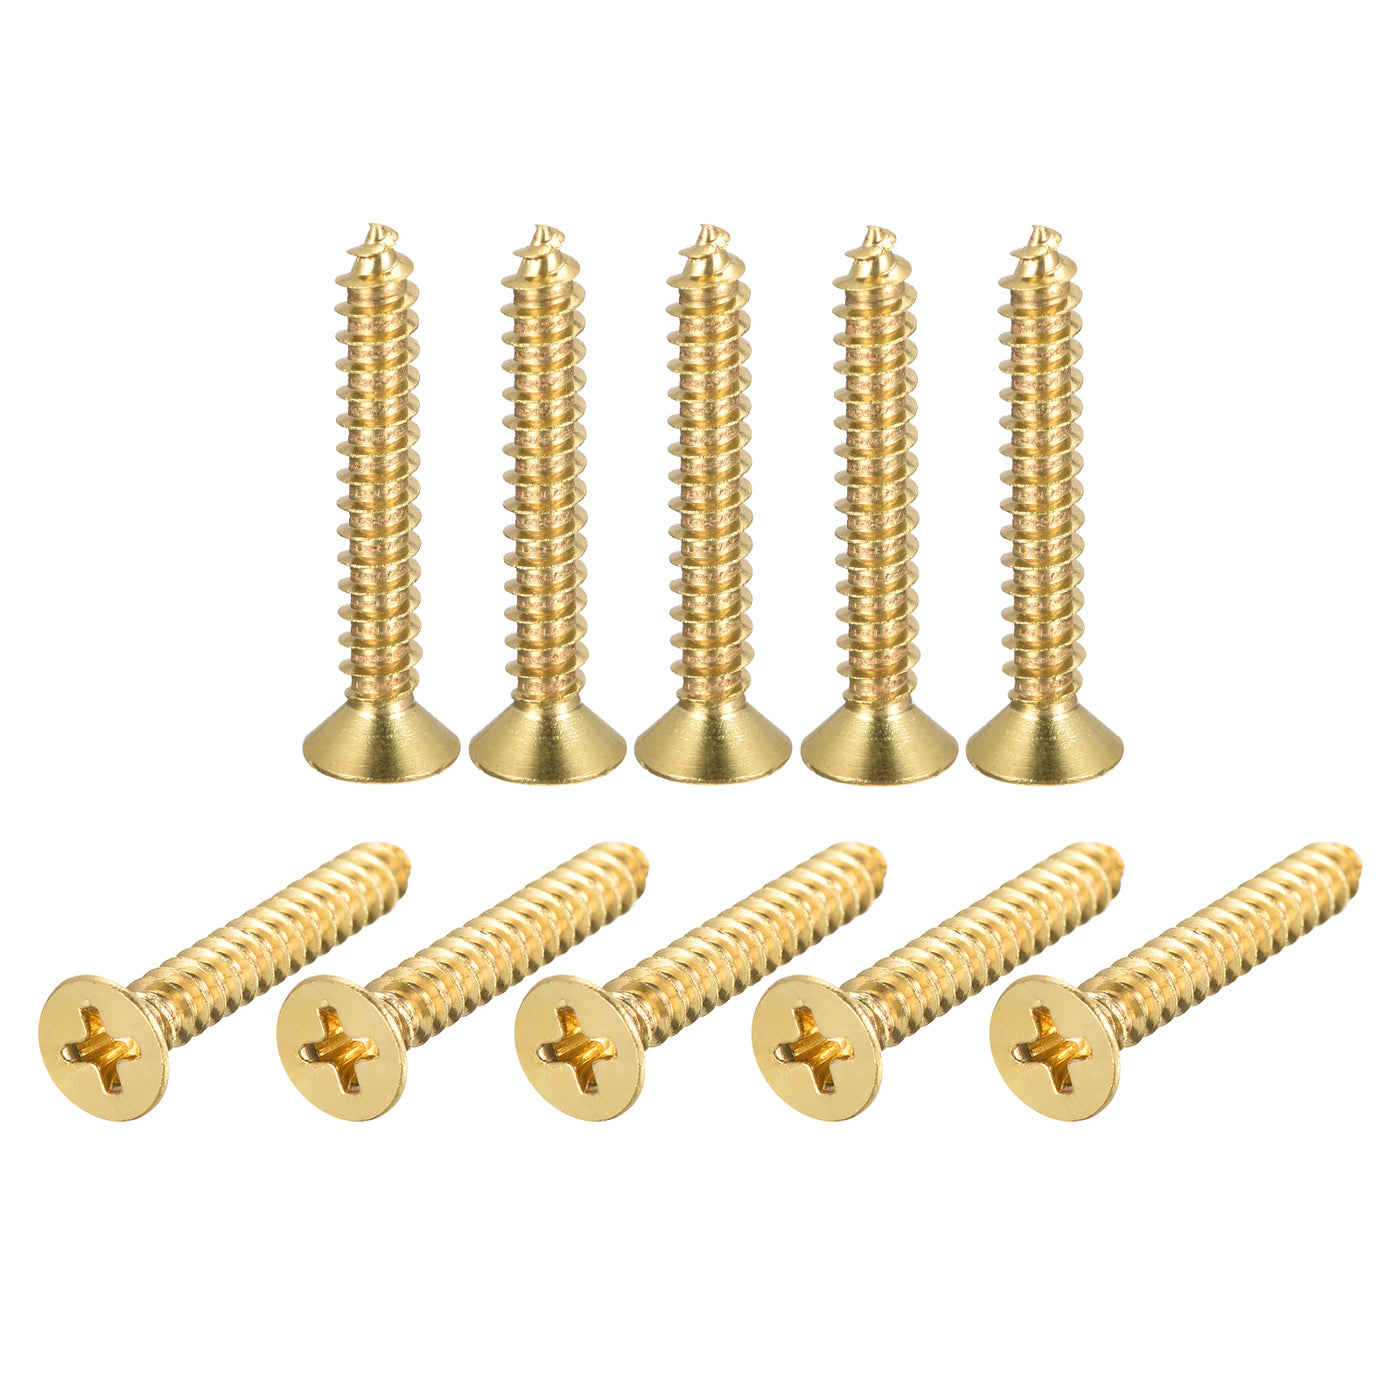 uxcell Uxcell Brass Wood Screws, M5x30mm Phillips Flat Head Self Tapping Connector for Door Hinges, Wooden Furniture, Home Appliances 20Pcs